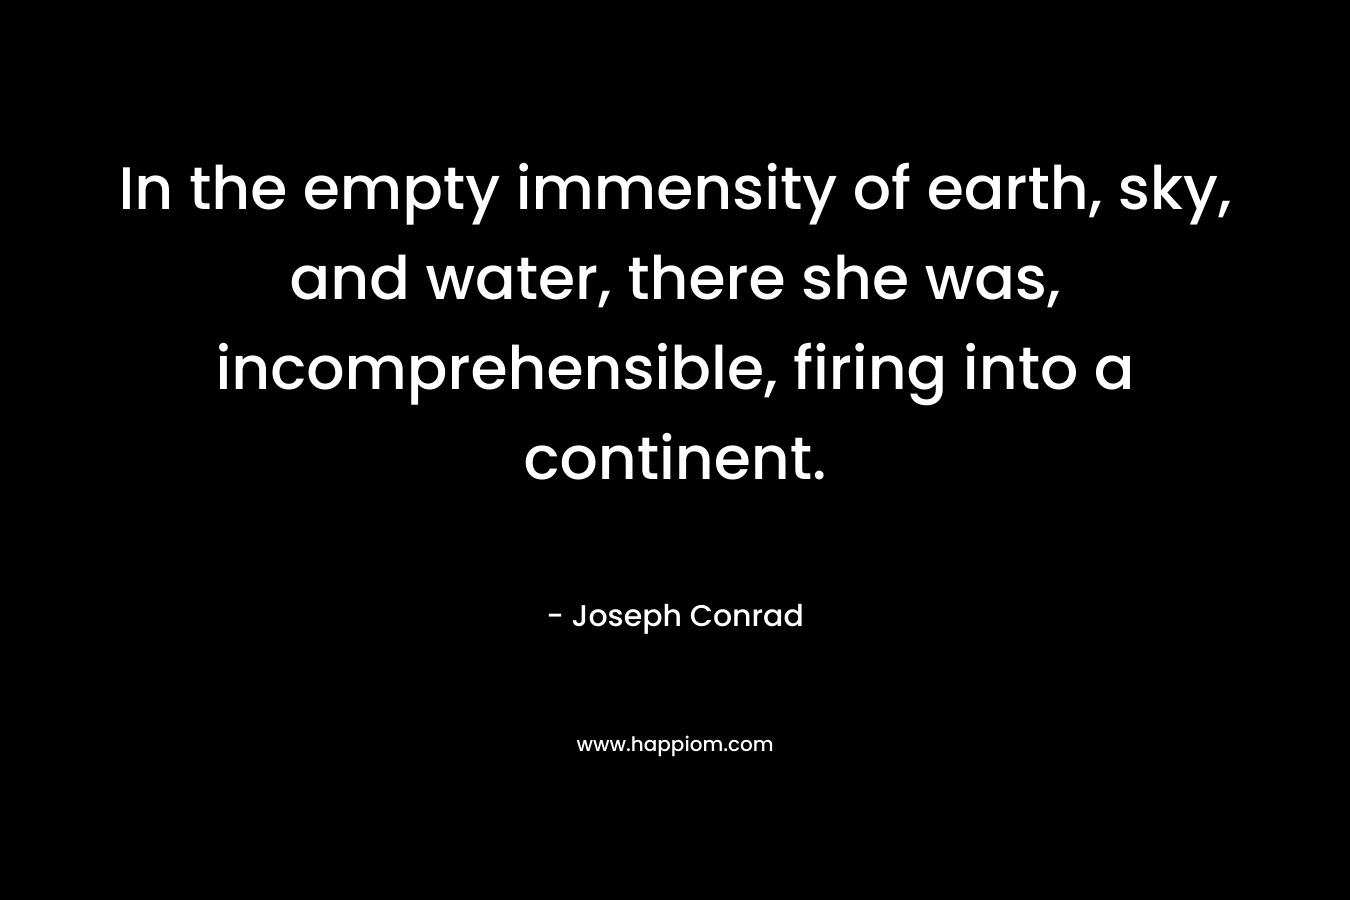 In the empty immensity of earth, sky, and water, there she was, incomprehensible, firing into a continent. – Joseph Conrad